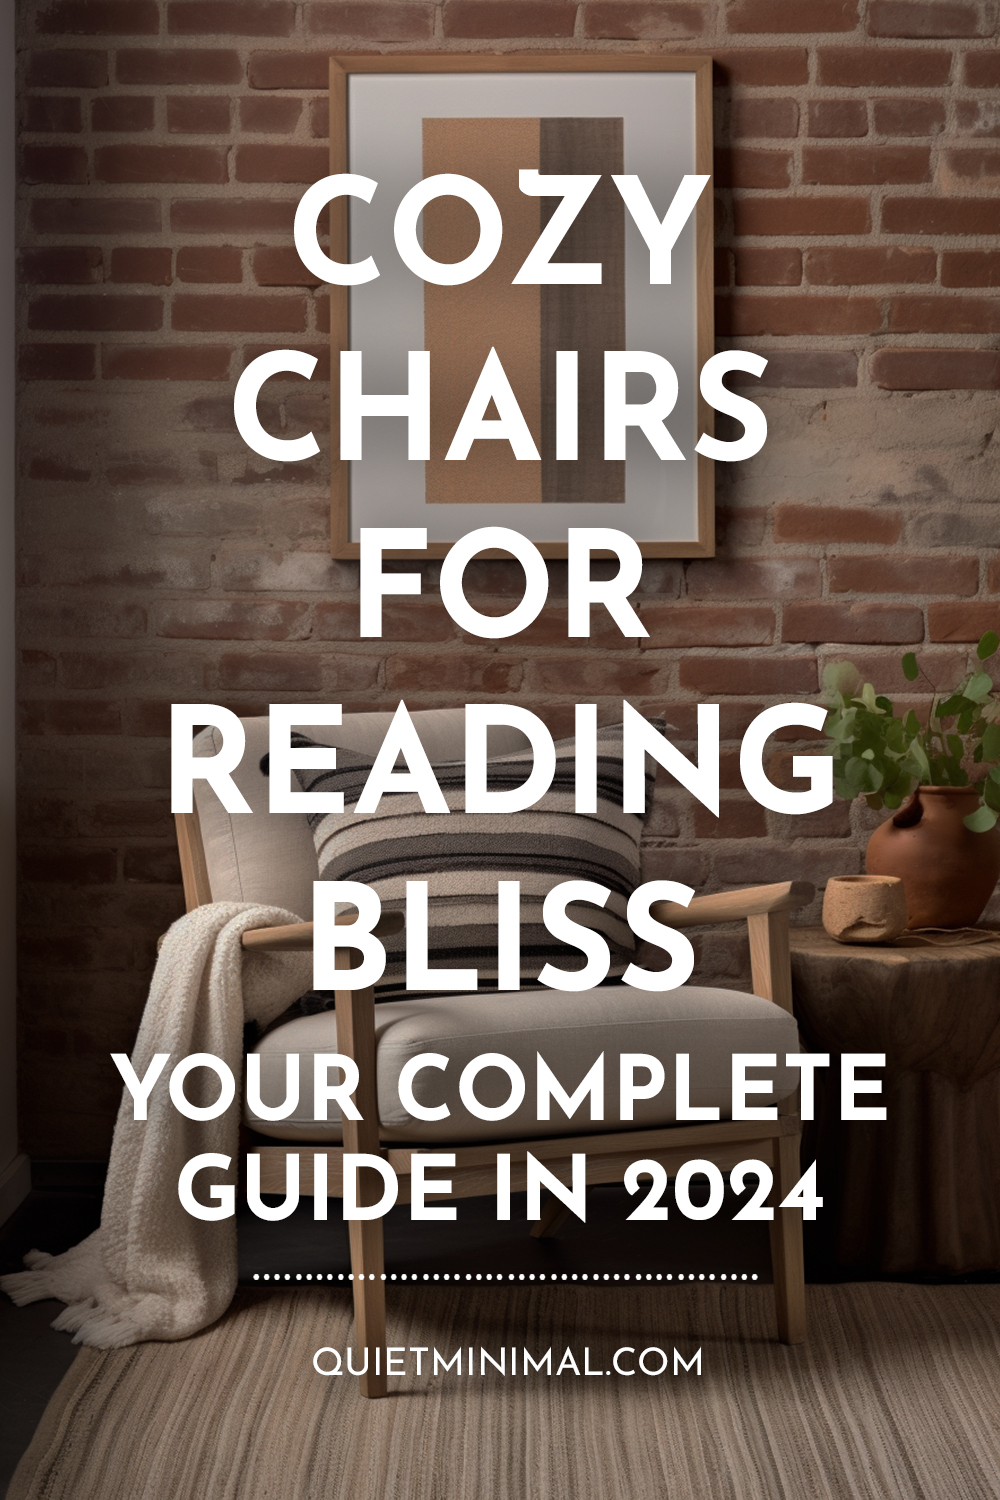 Cozy chairs for reading bliss - your complete guide in 2020.